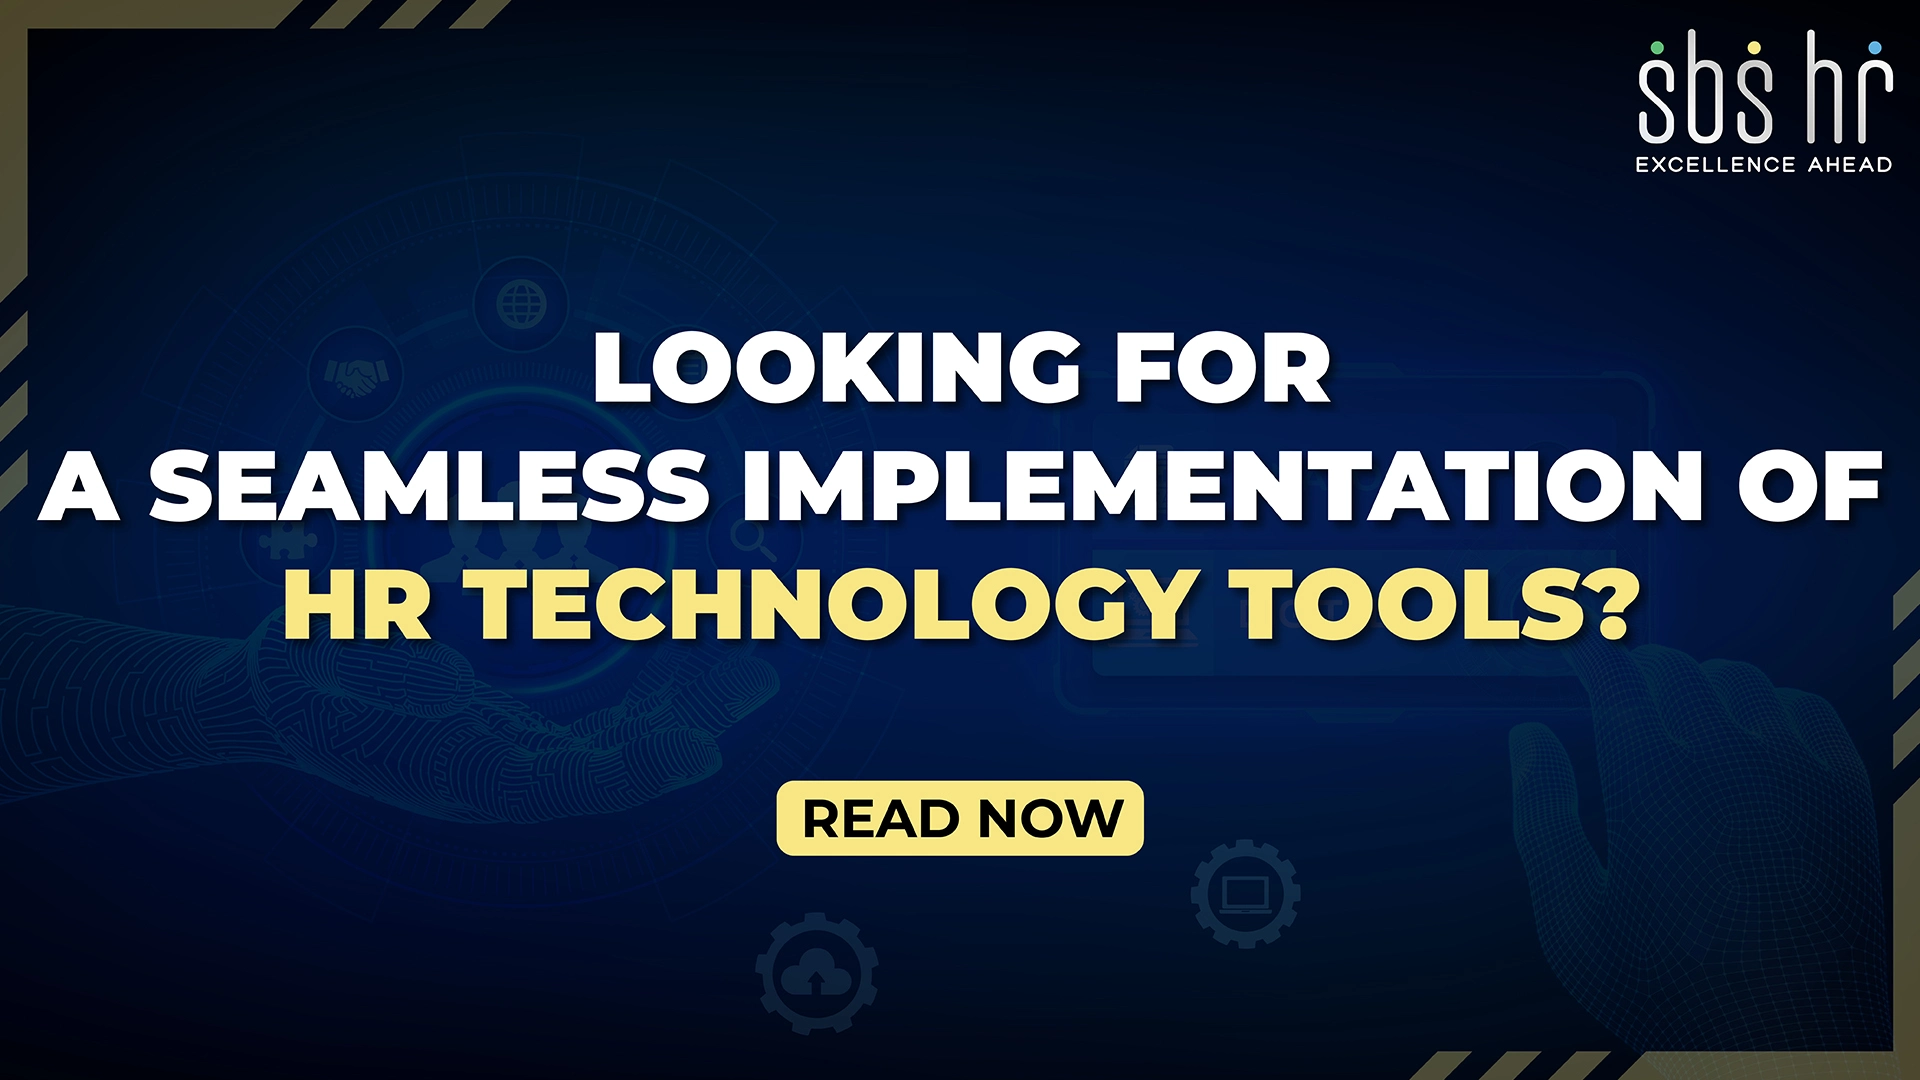 Looking for a seamless implementation of HR technology tools?